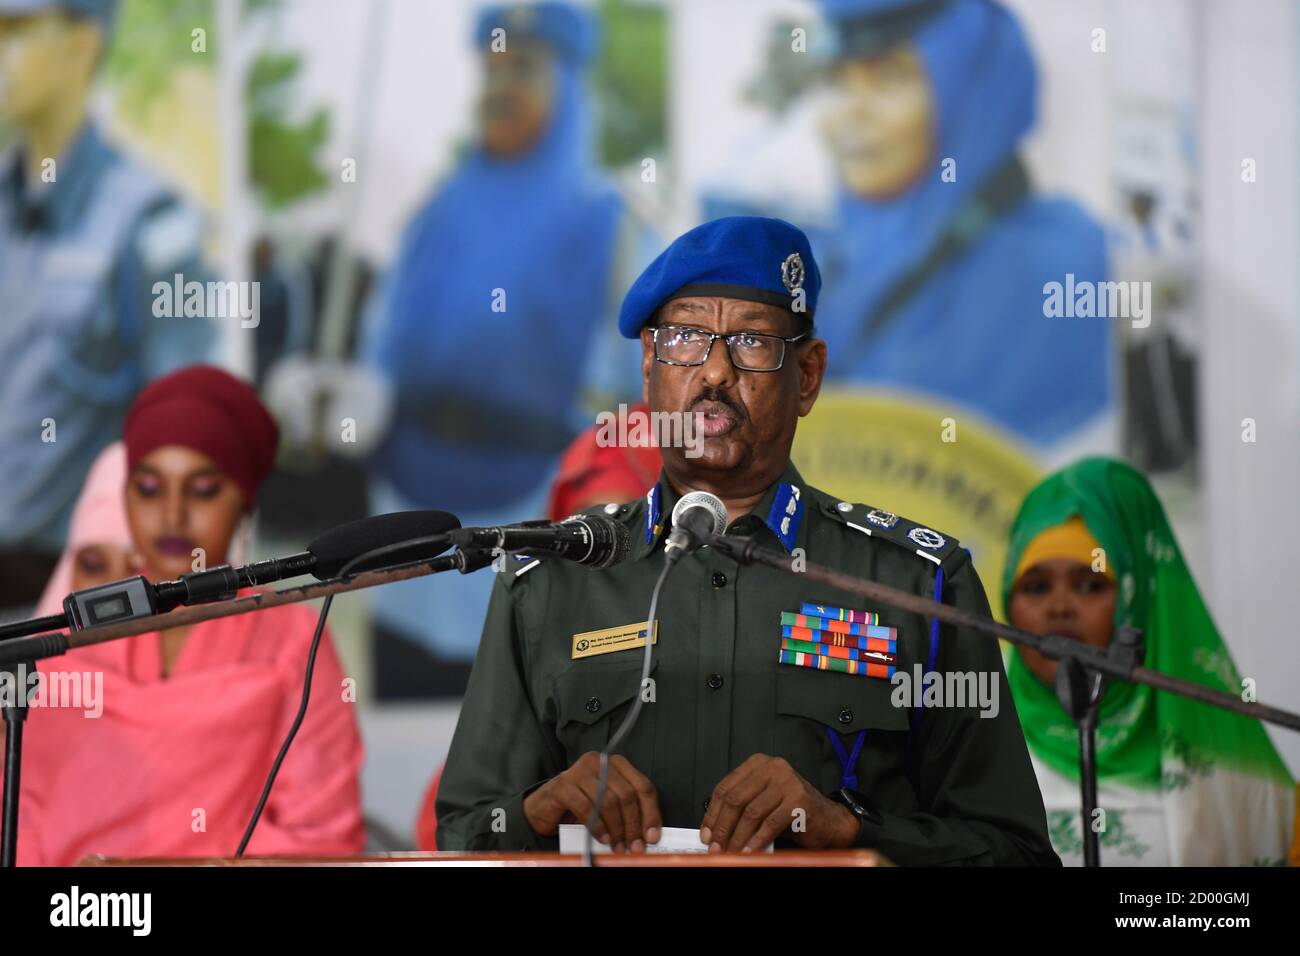 Somalia Police Commissioner Maj. Gen. Abdi Hassan Mohamed speaks during a pass-out ceremony for Darwish forces at General Kahiye Police Academy in Mogadishu, Somalia on 13 February 2020. Stock Photo